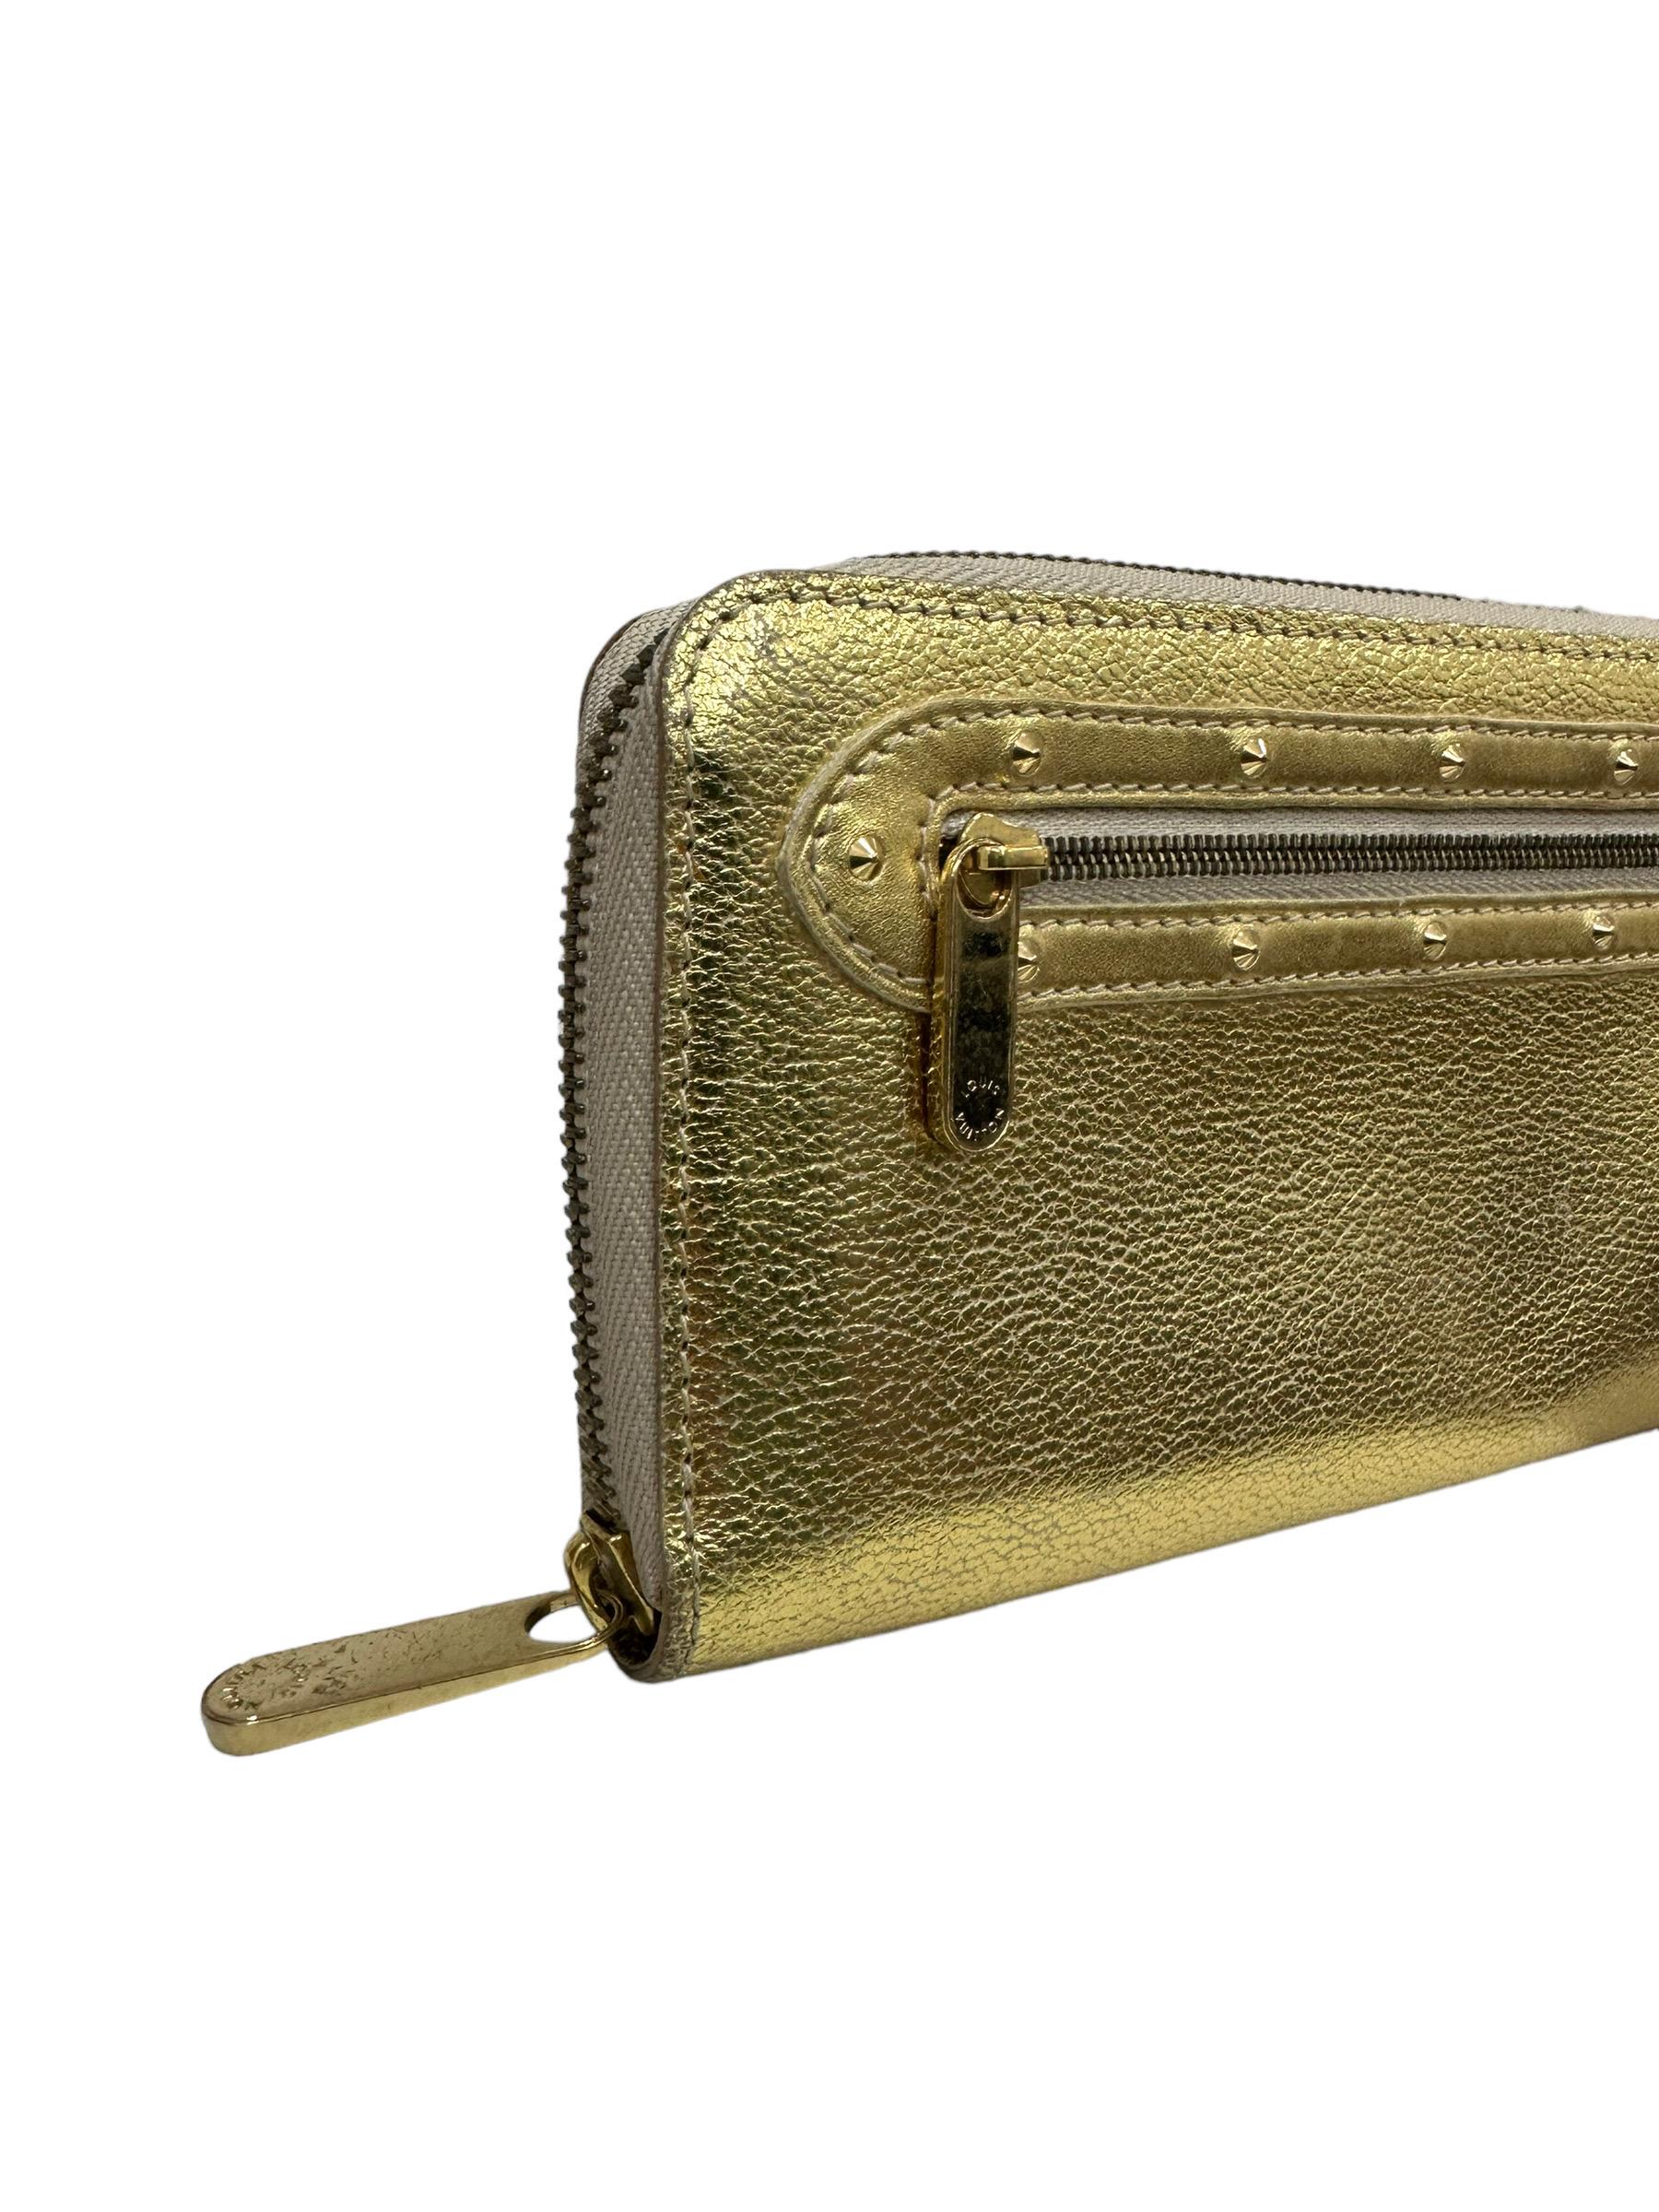 Wallet by Louis Vuitton, Zippy model, Suhali line, made in gold colored leather with gold hardware. Equipped with a zip closure, internally lined in smooth golden leather. There are several compartments for cards and a central pocket with zip